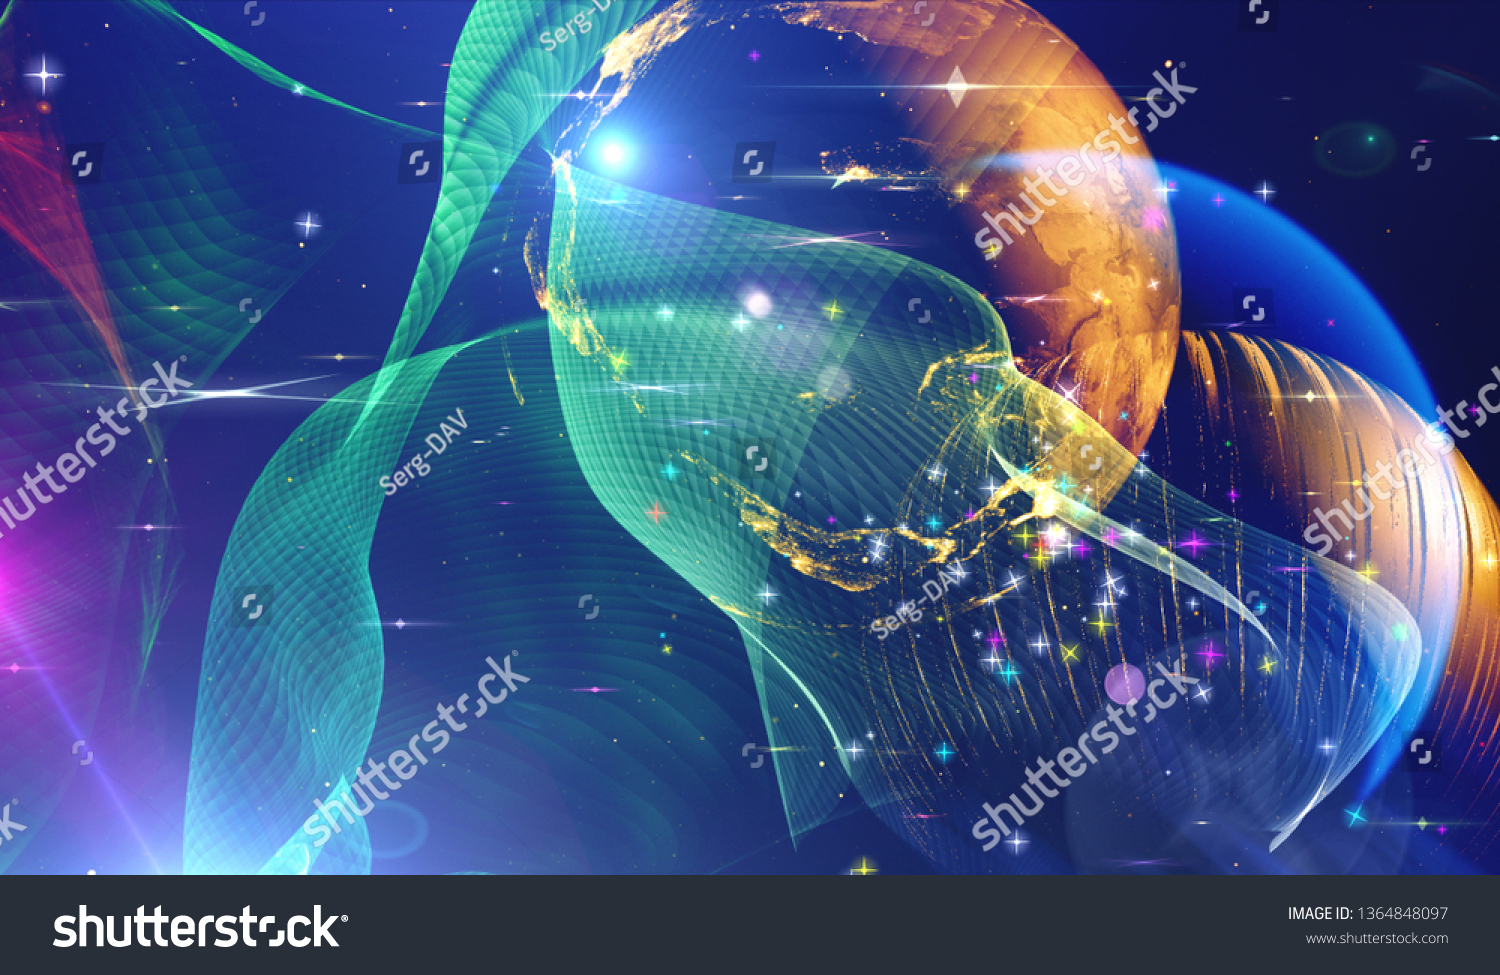 Explosion of stars in space. Planets in distant solar system in space. Computer technological graphics. Digital illustration. #1364848097